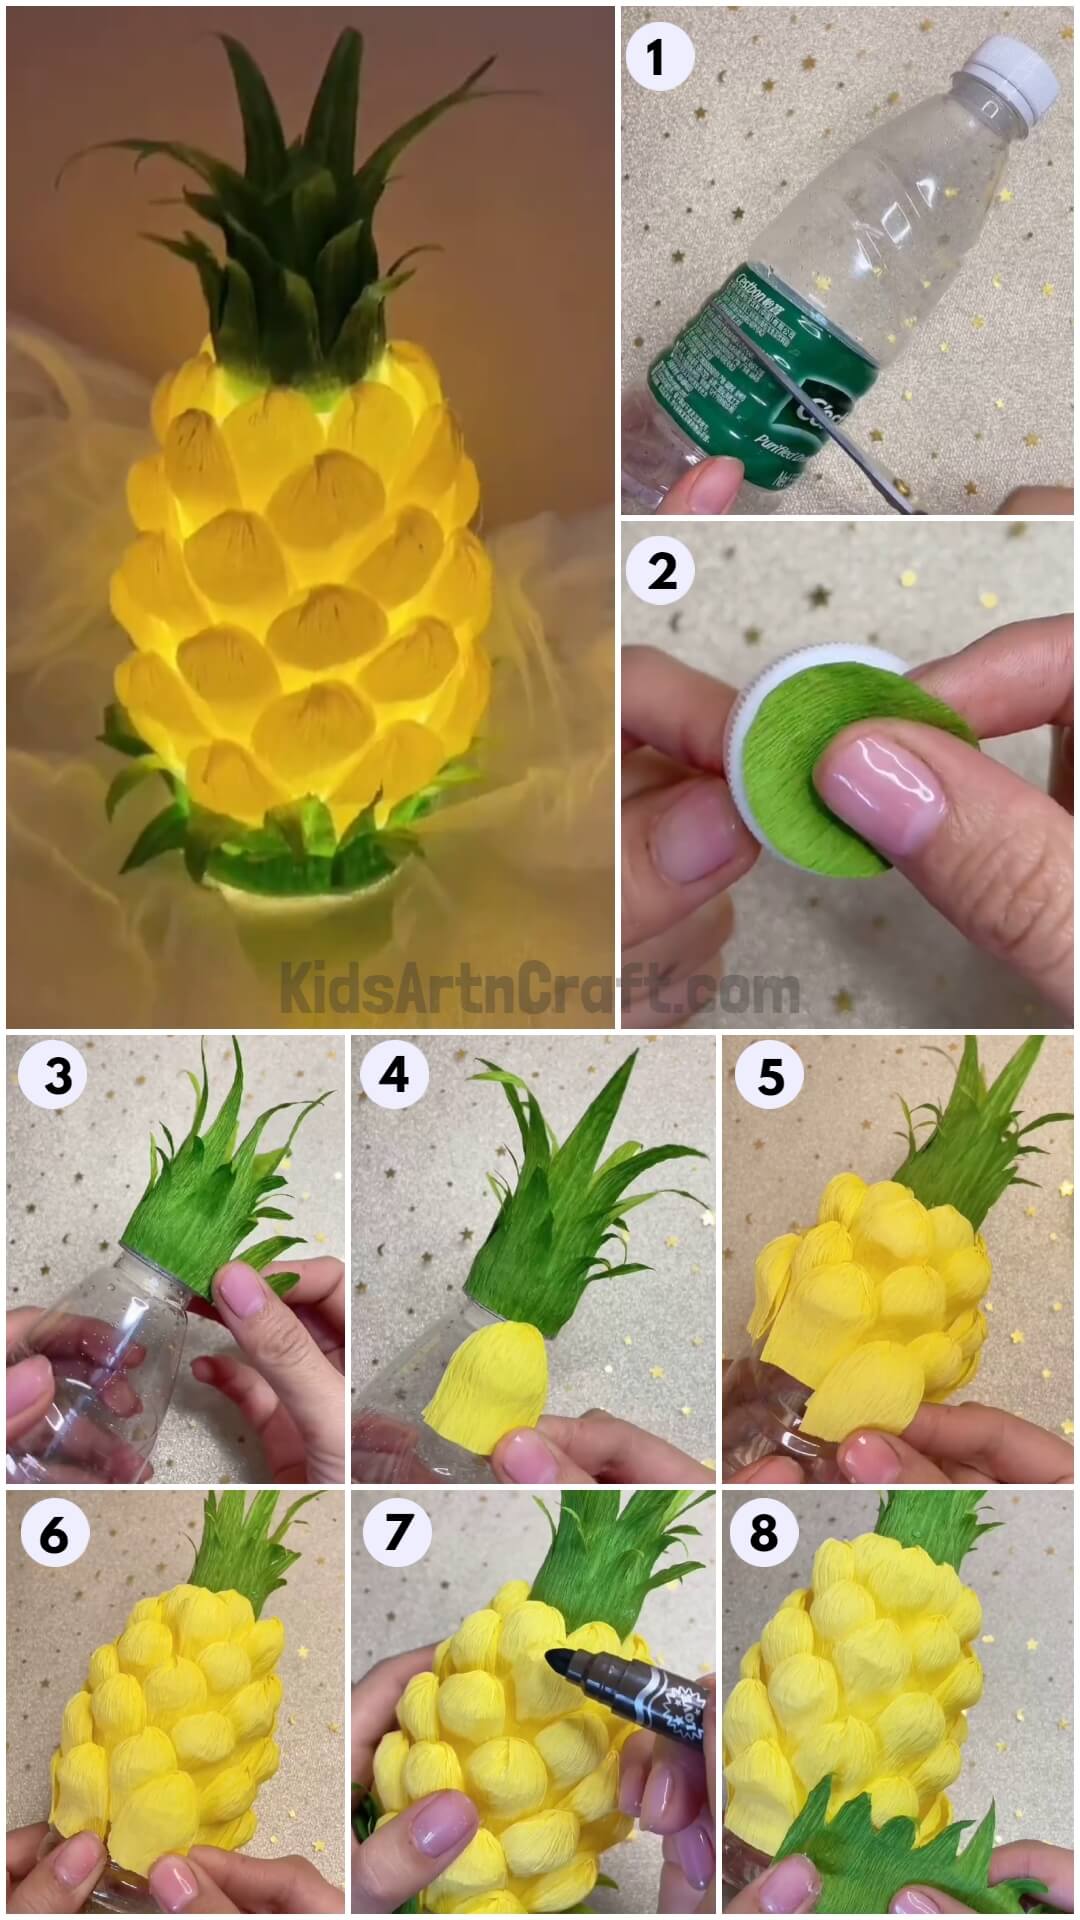 How to Make Pineapple Hanging Lamp from Plastic Bottle